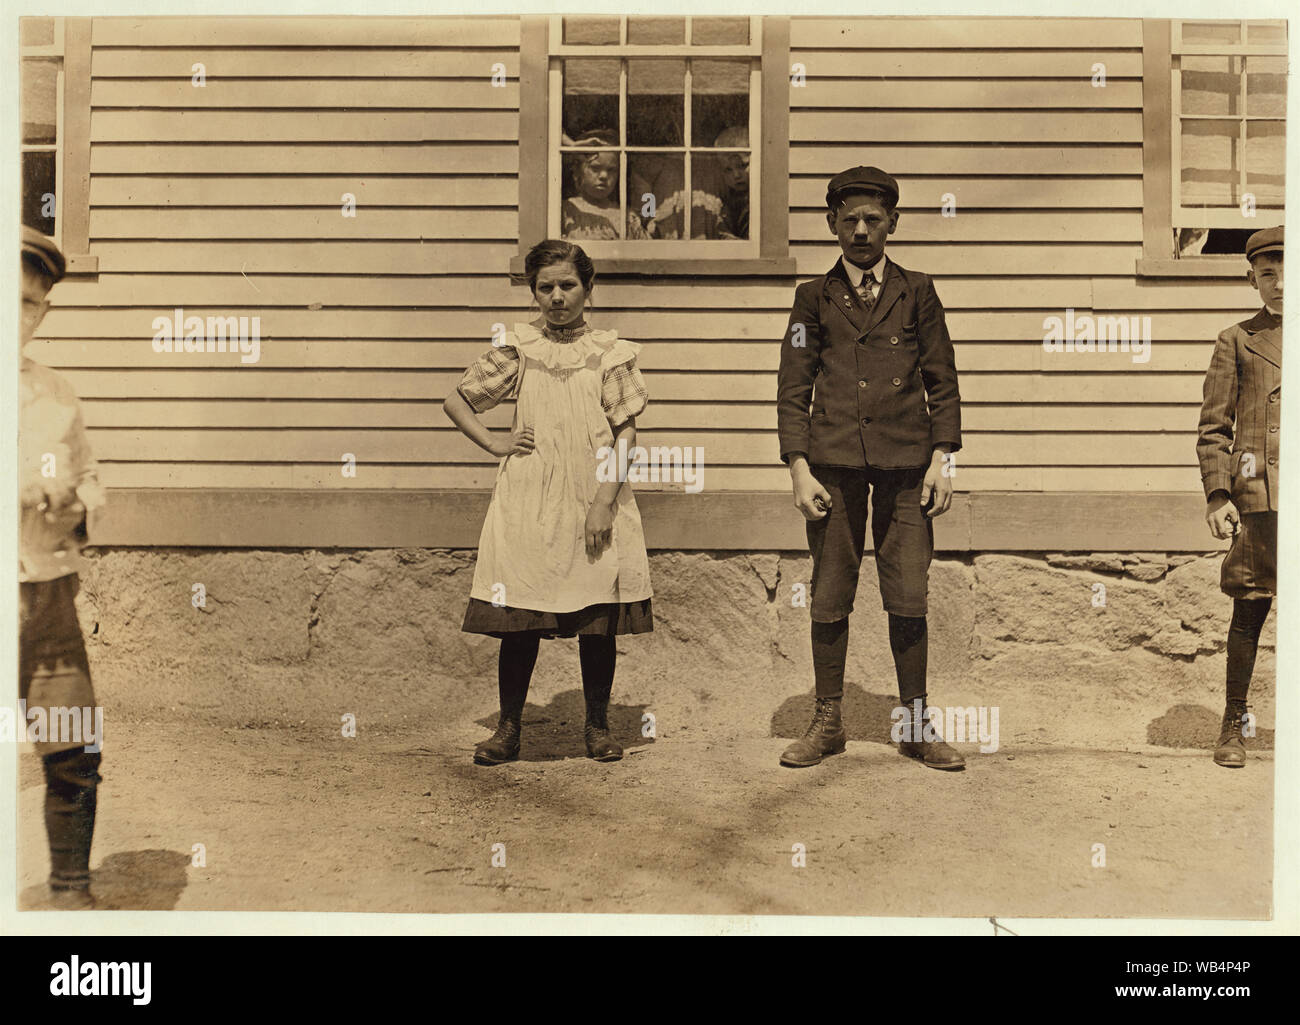 Edward St. Germain and sister Delia. She has been working in Phoenix (R.I.) Mill for 8 months. He works also. They cannot speak English. Abstract: Photographs from the records of the National Child Labor Committee (U.S.) Stock Photo